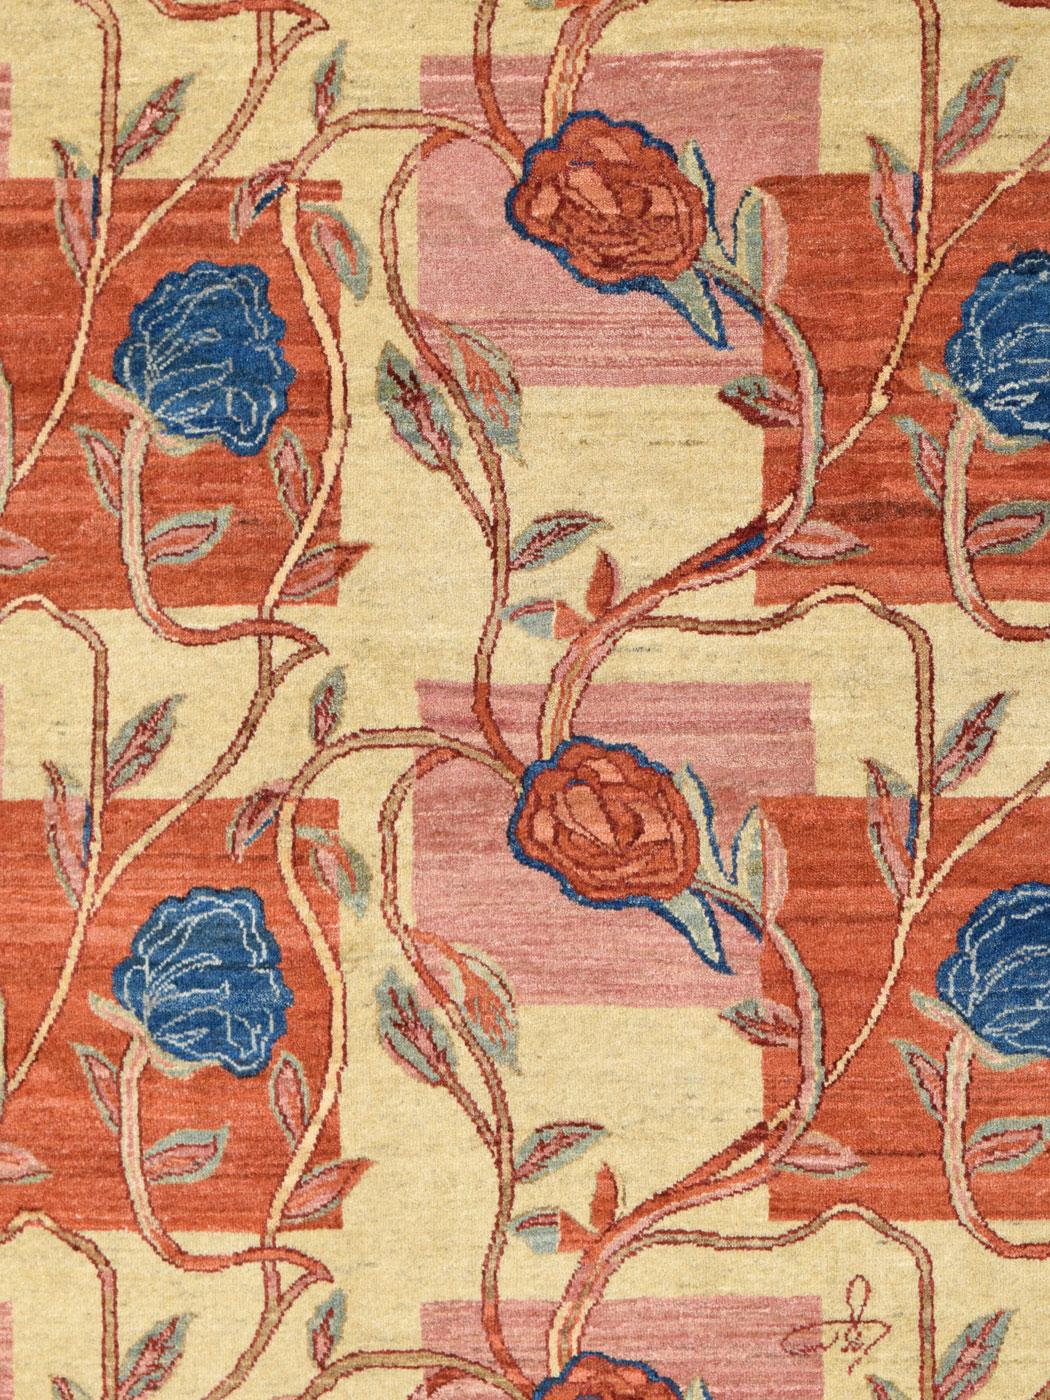 Welcome this 4' x 6' floral red, pink, blue, and cream wool Orley Shabahang Persian rug into your home. As serene as looking upon a scene of lush roses snaking their way around a trellis, 